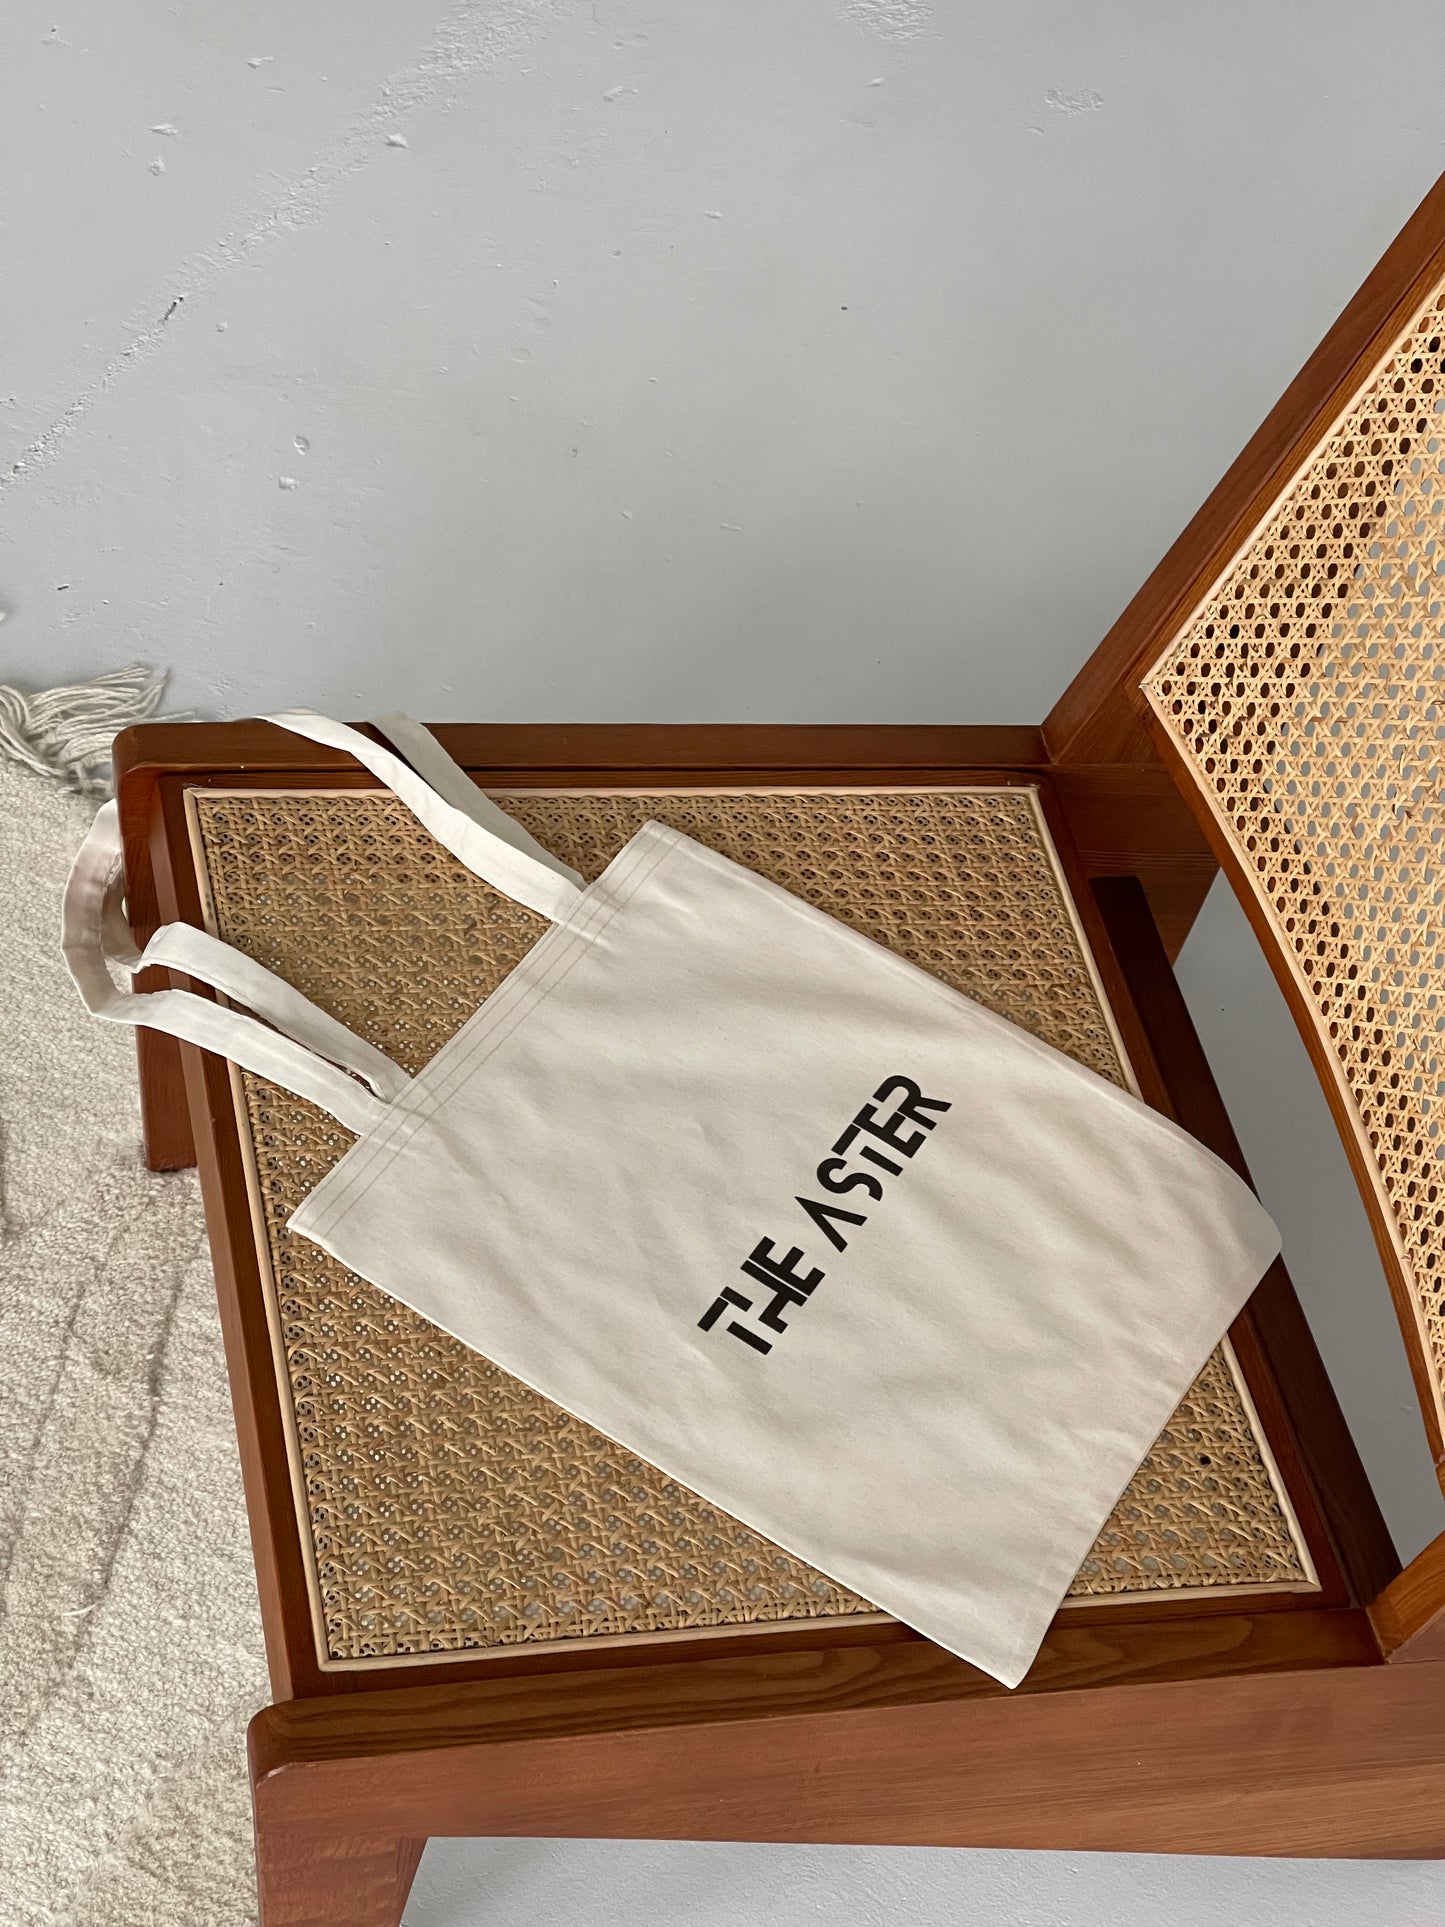 Tote bag "The way you speak to yourself matters"